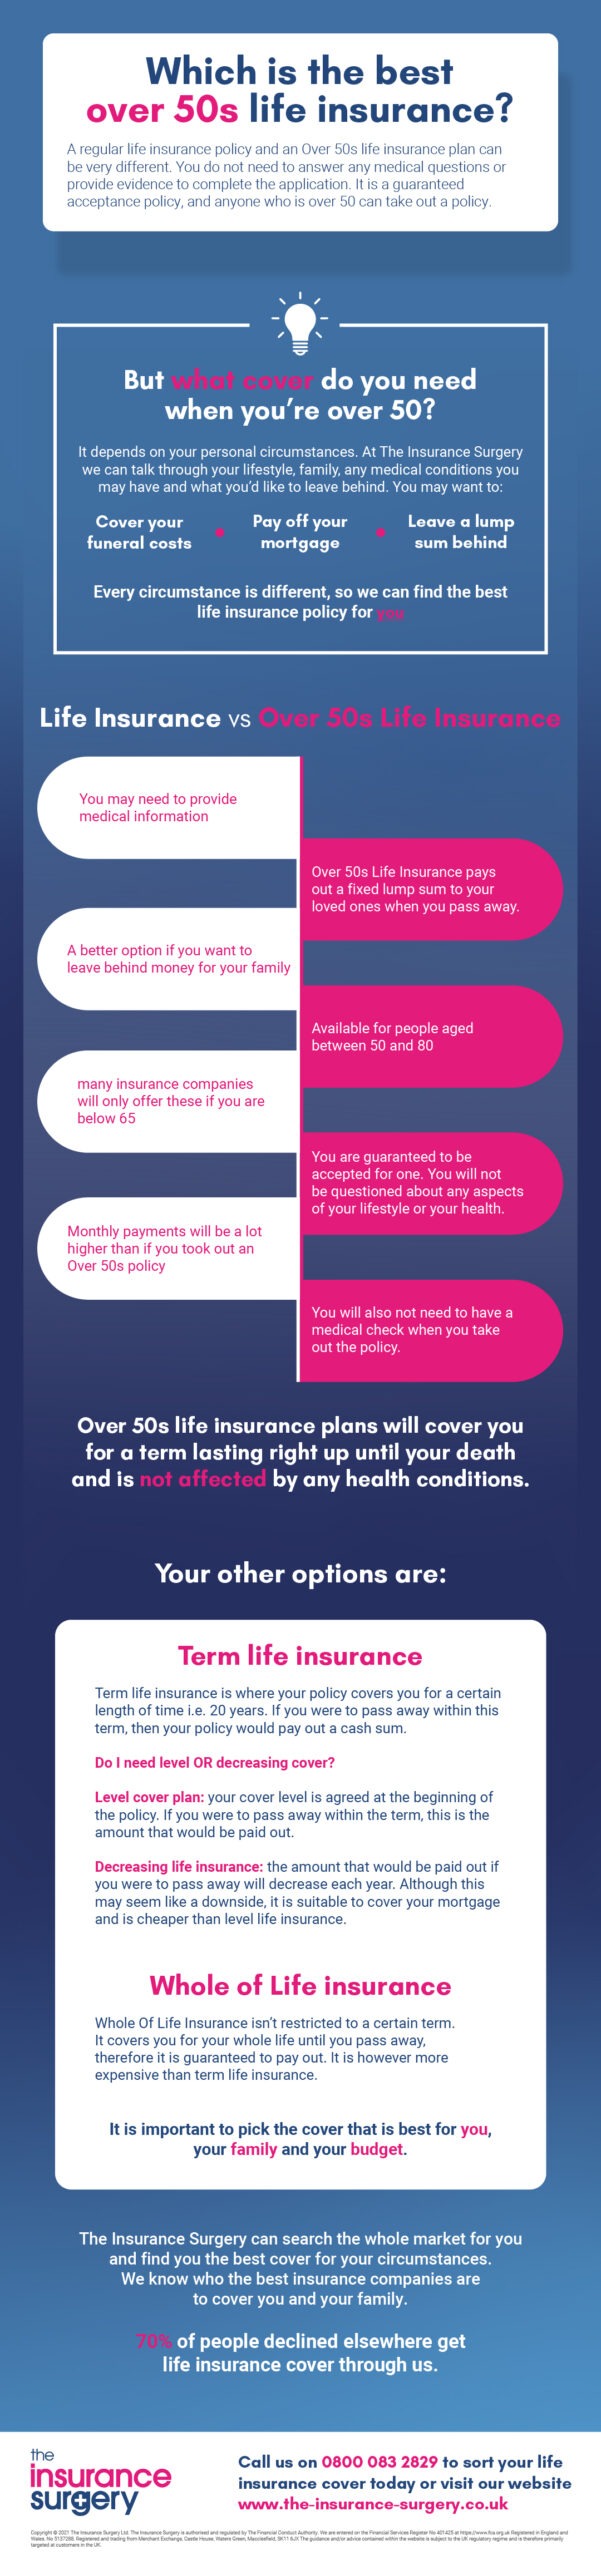 Over 50s Life Insurance Infographic